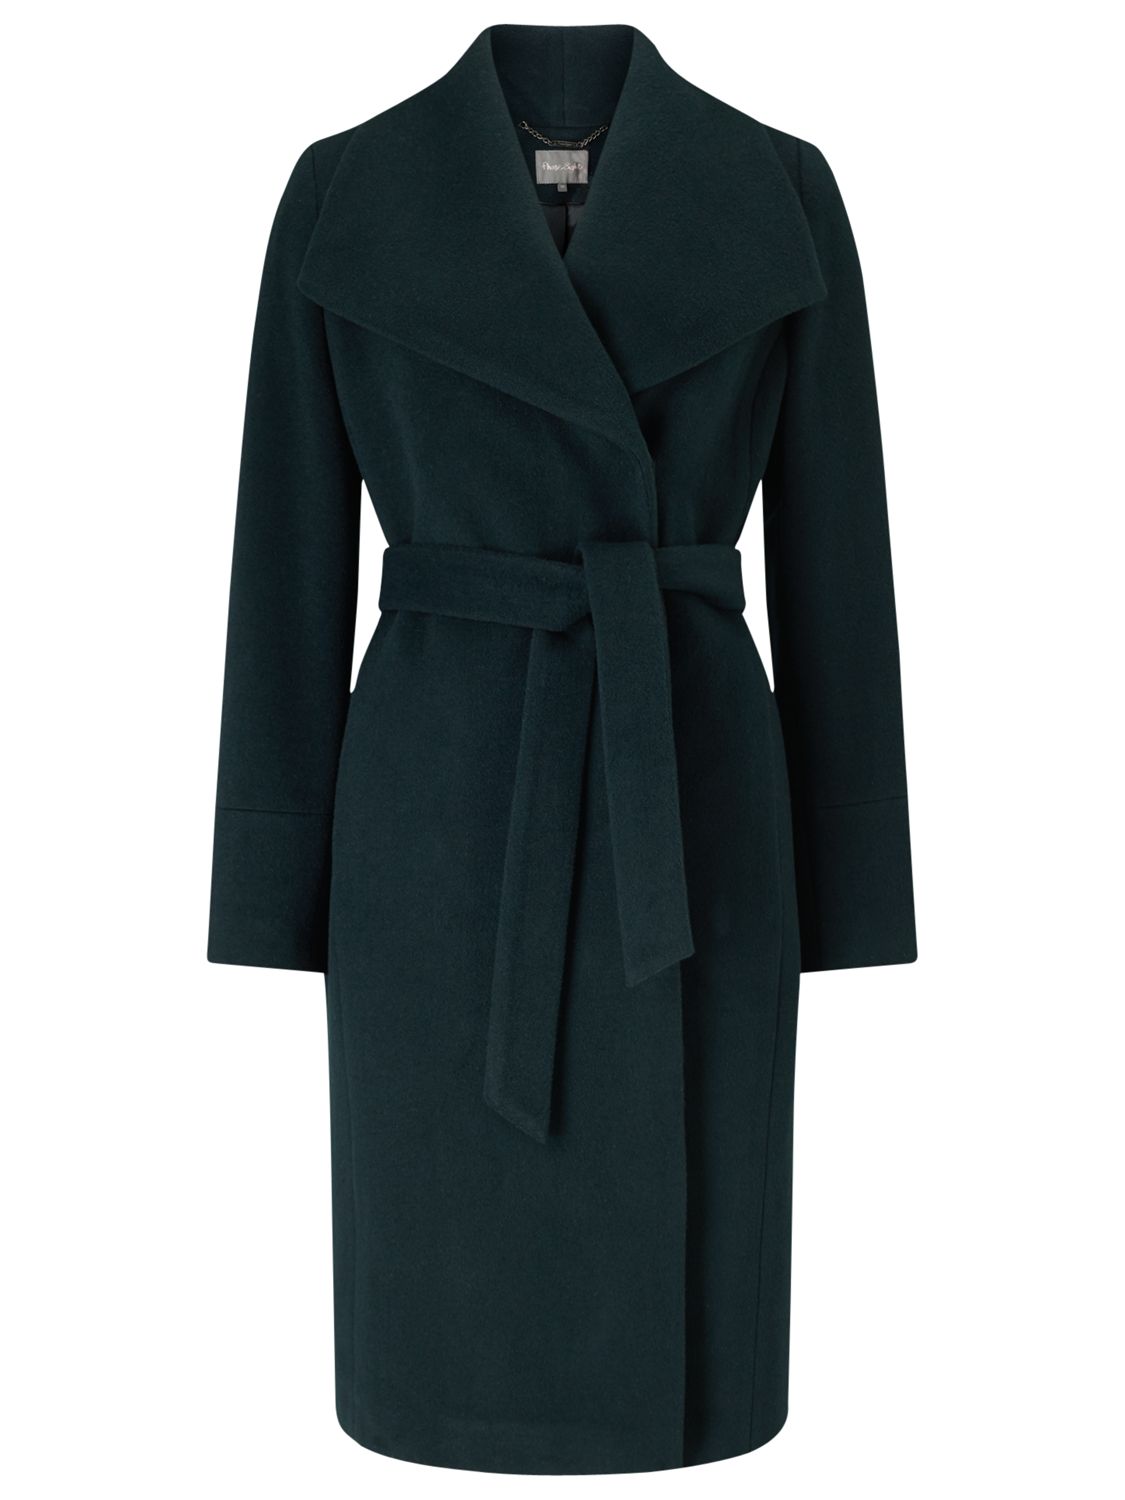 Phase Eight Nicci Belted Coat, Dark Forest